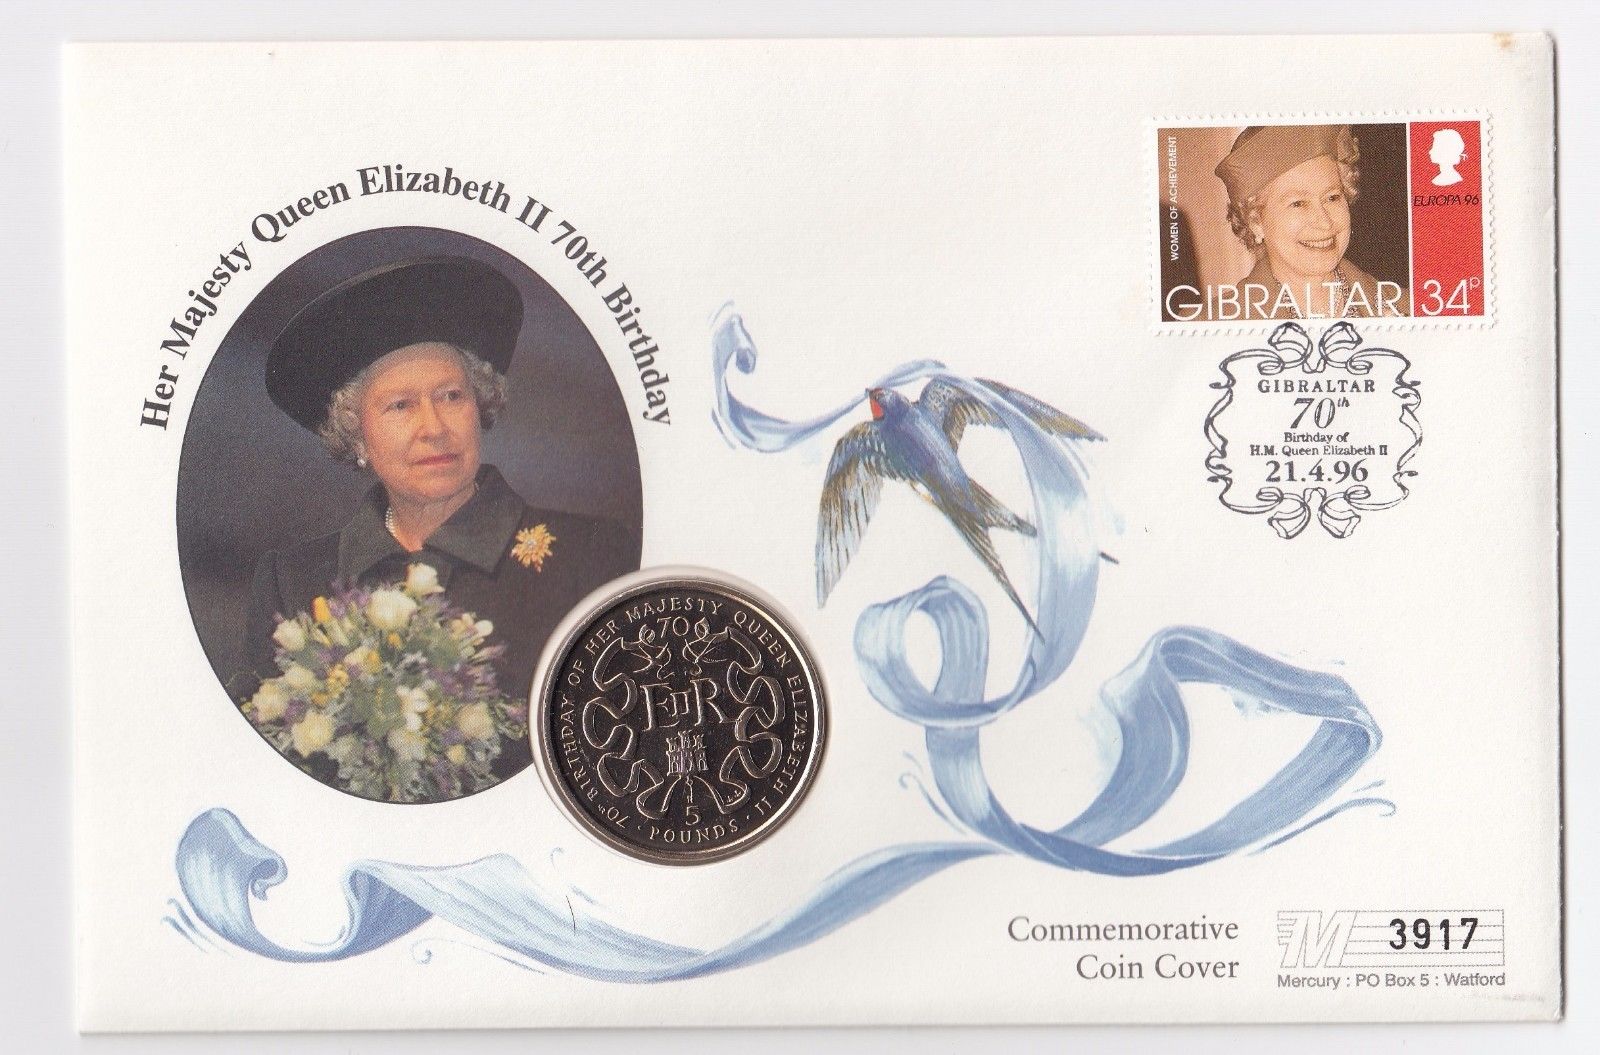 1996 Gibraltar QE II 70th Birthday Five Pound Coin Cover